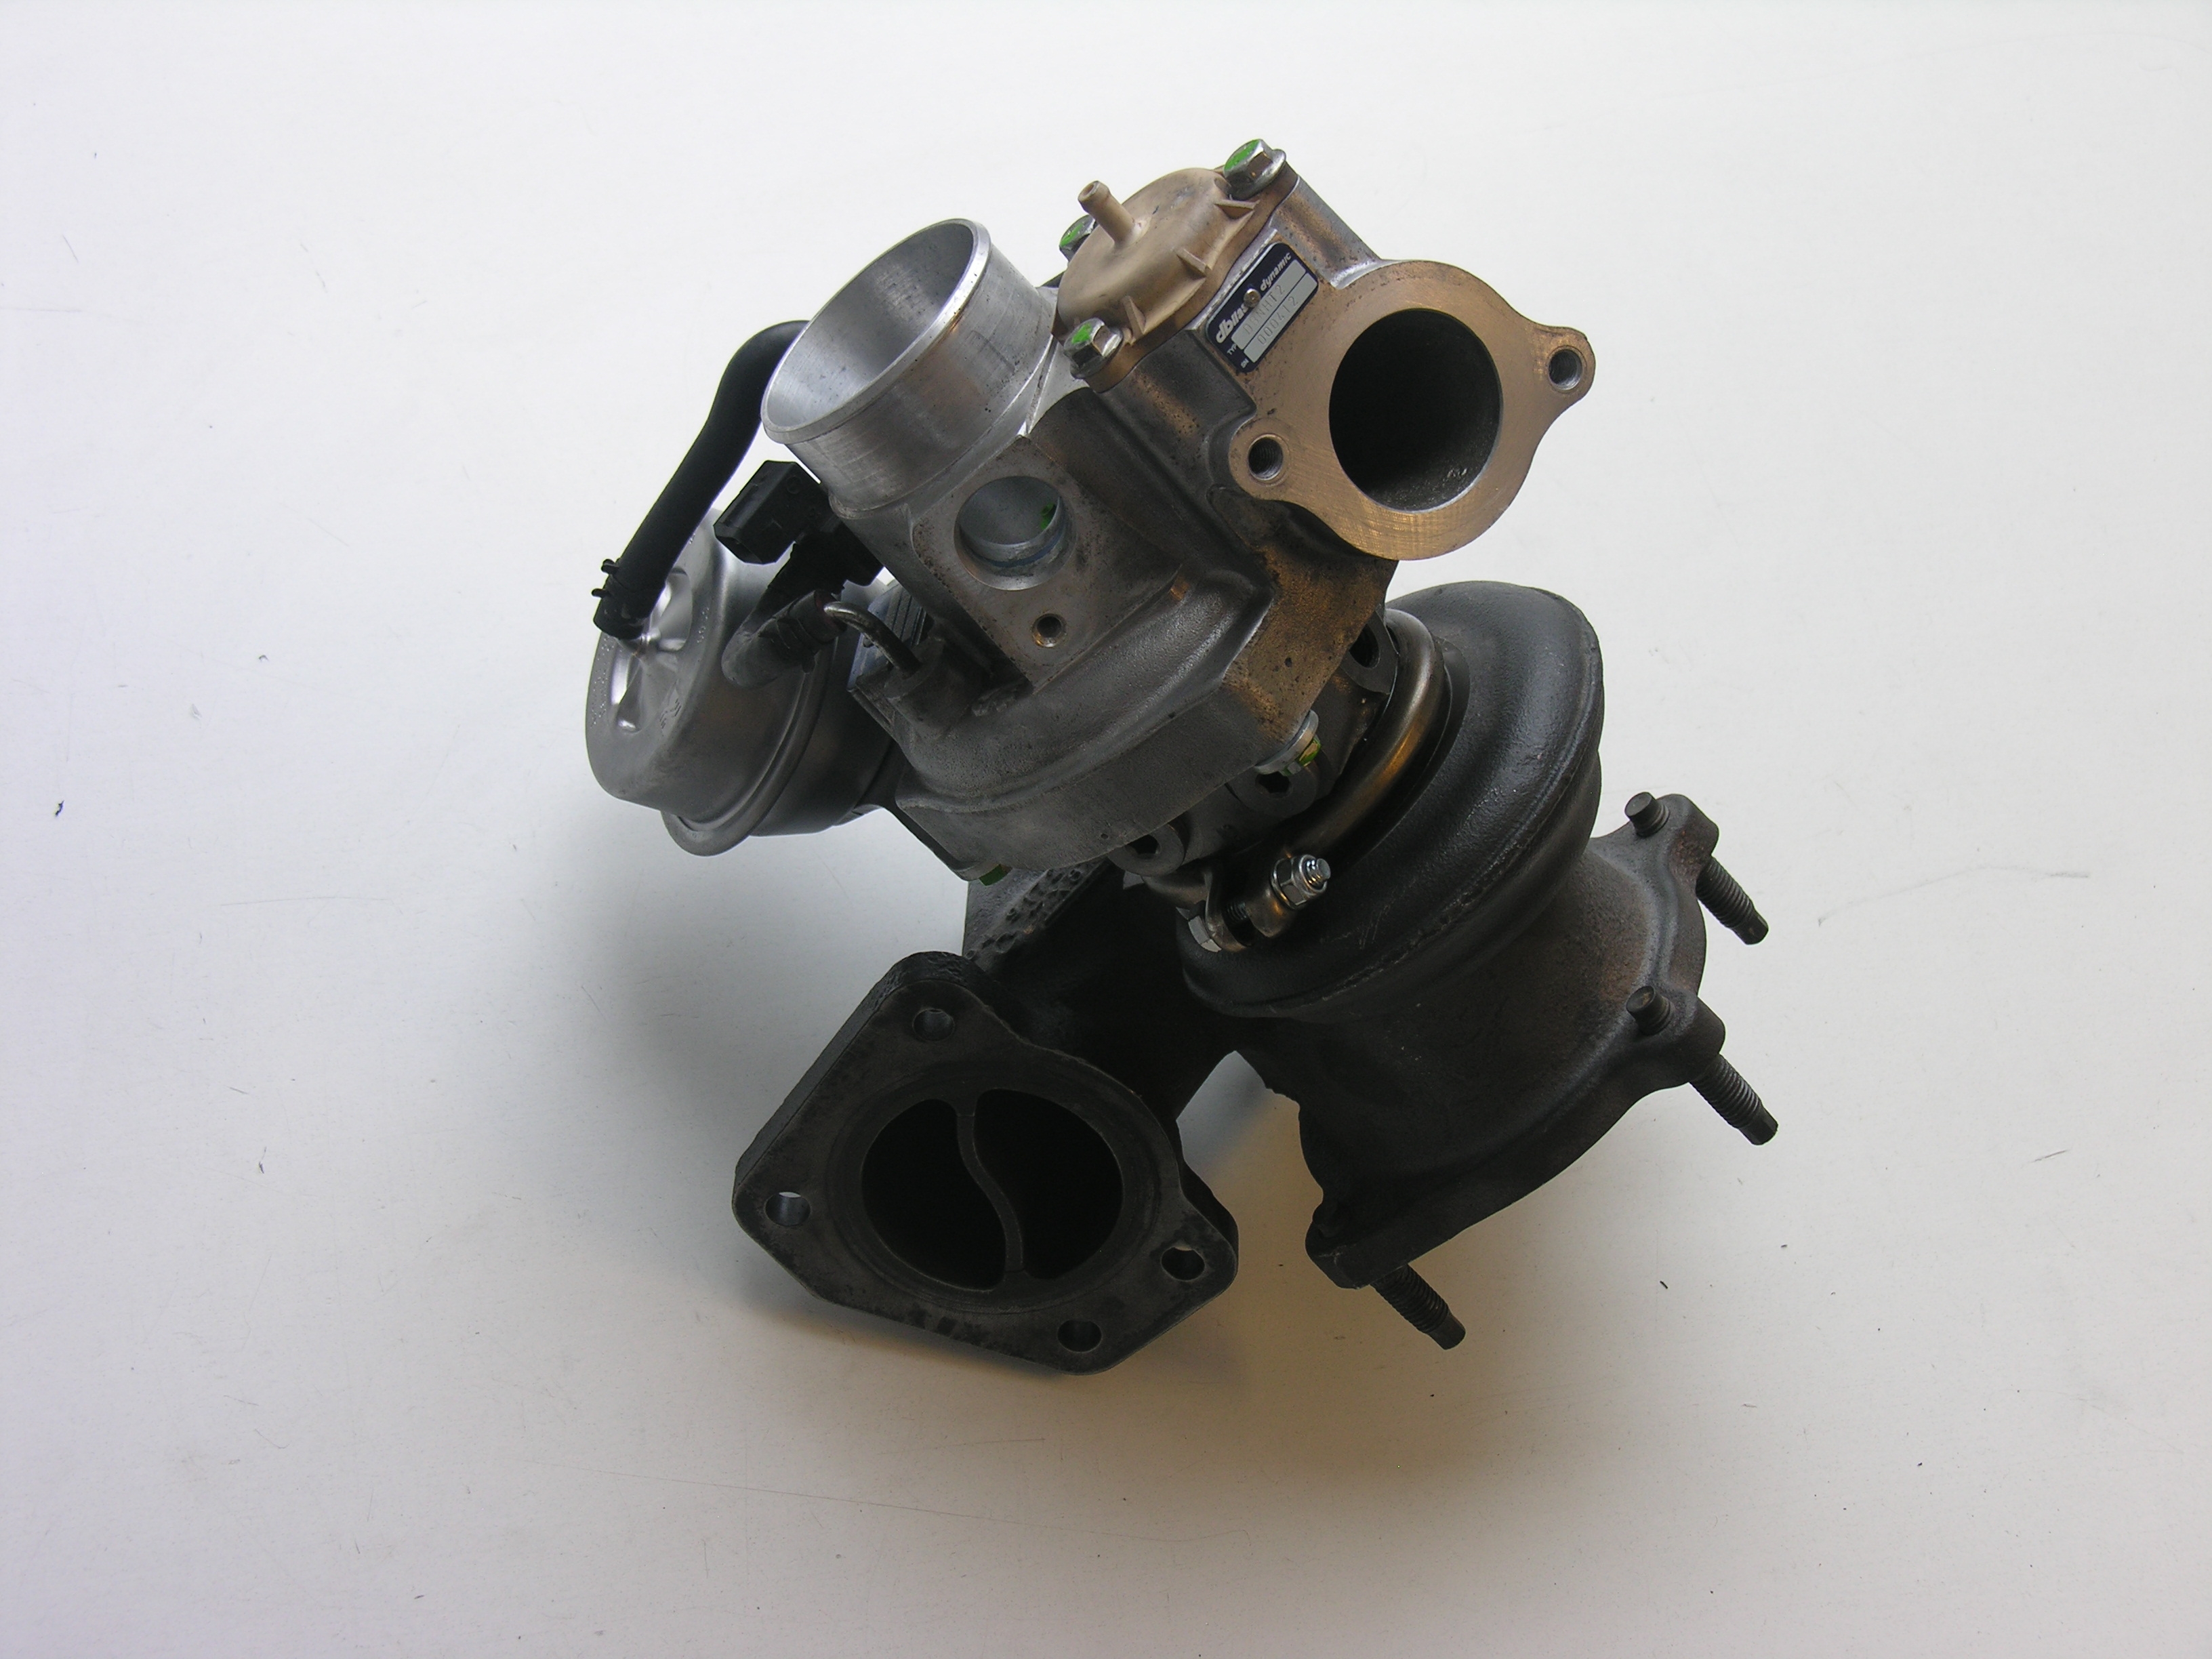 Upgrade Turbocharger for Opel/Vauxhall A20DTx until 255HP